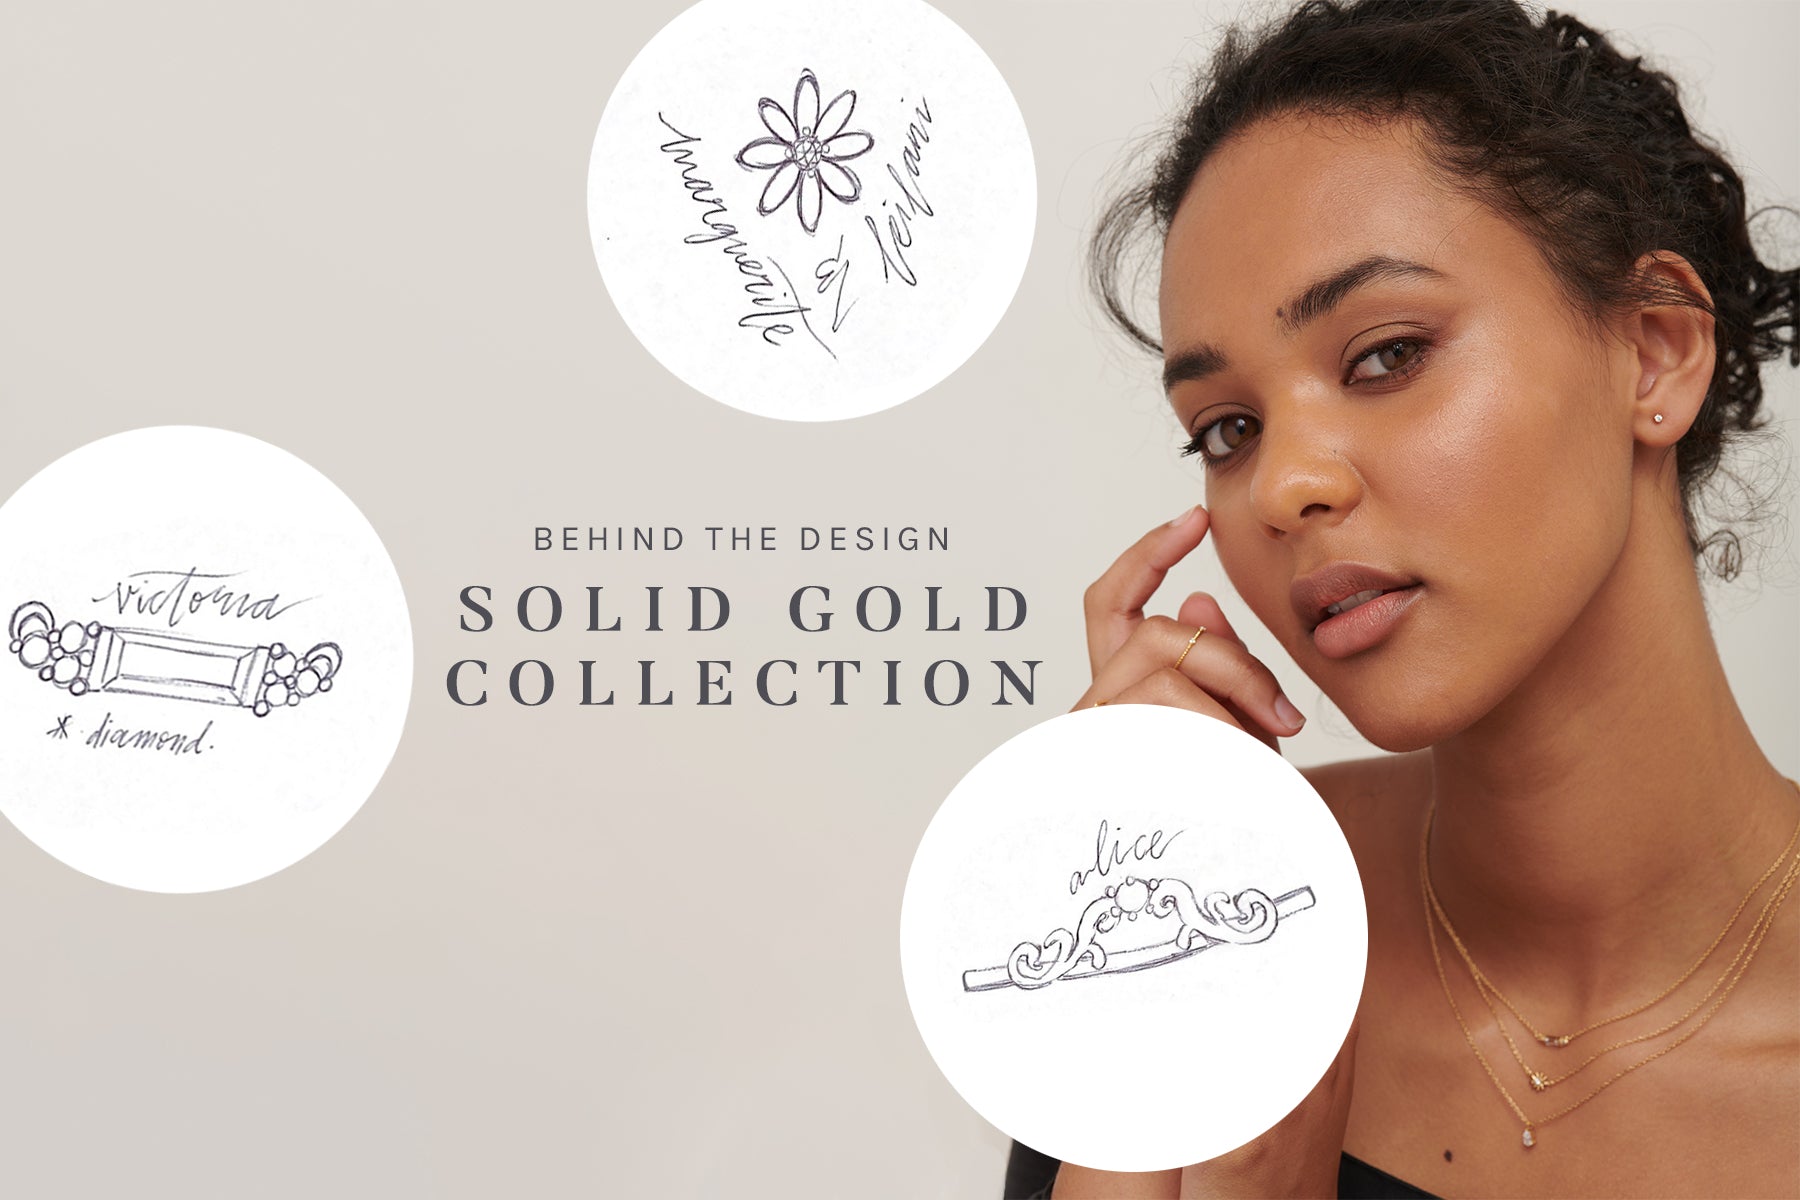 BEHIND THE DESIGN - SOLID GOLD